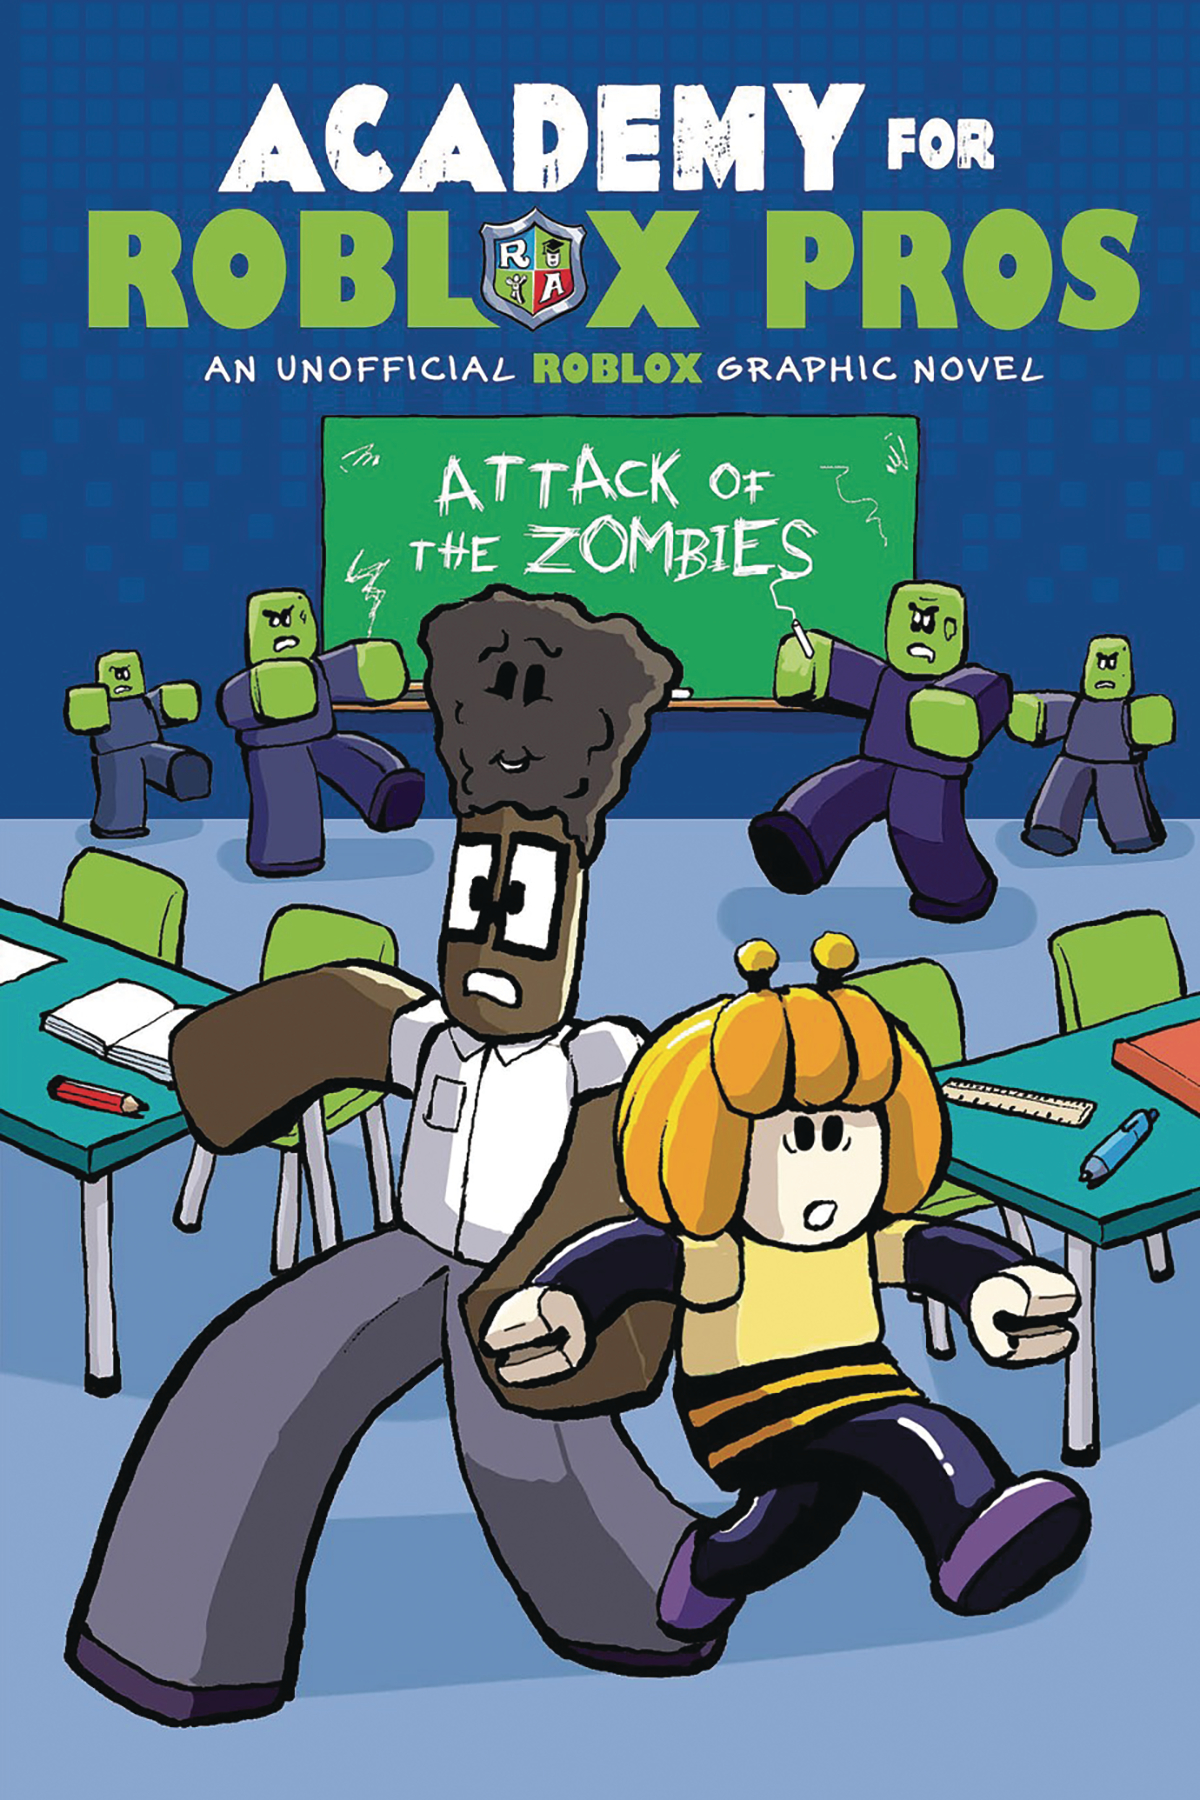 Academy for Roblox Pros Graphic Novel Volume 1 Attack of Zombies